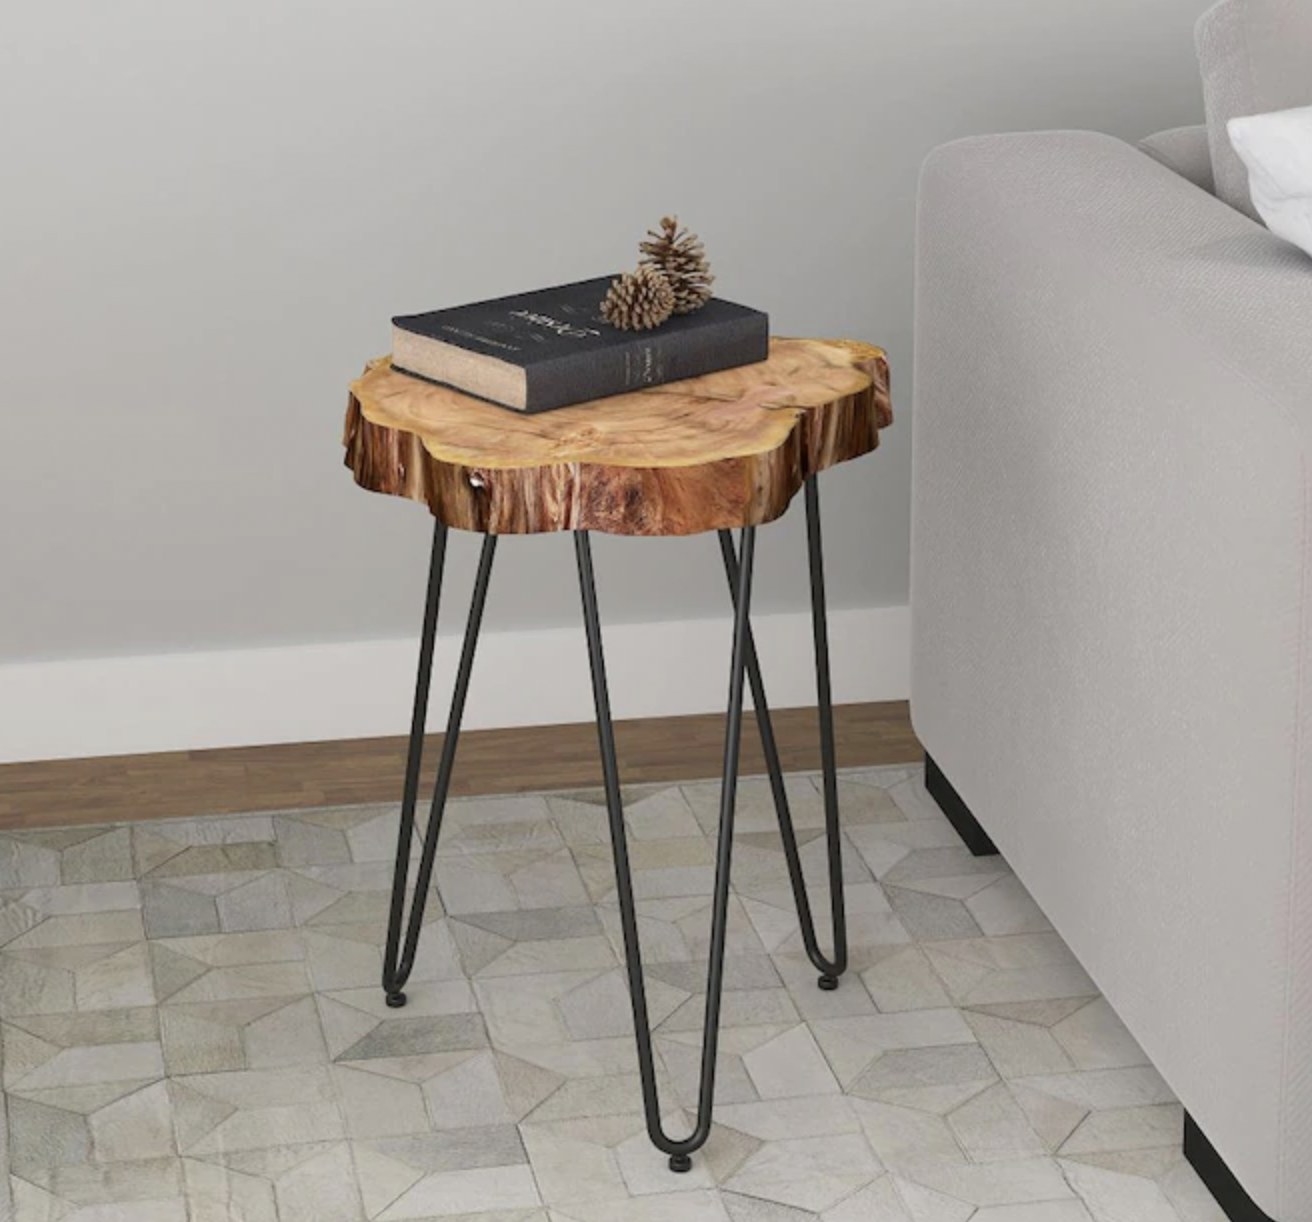 Wooden end table with steel legs next to a couch with a book on top